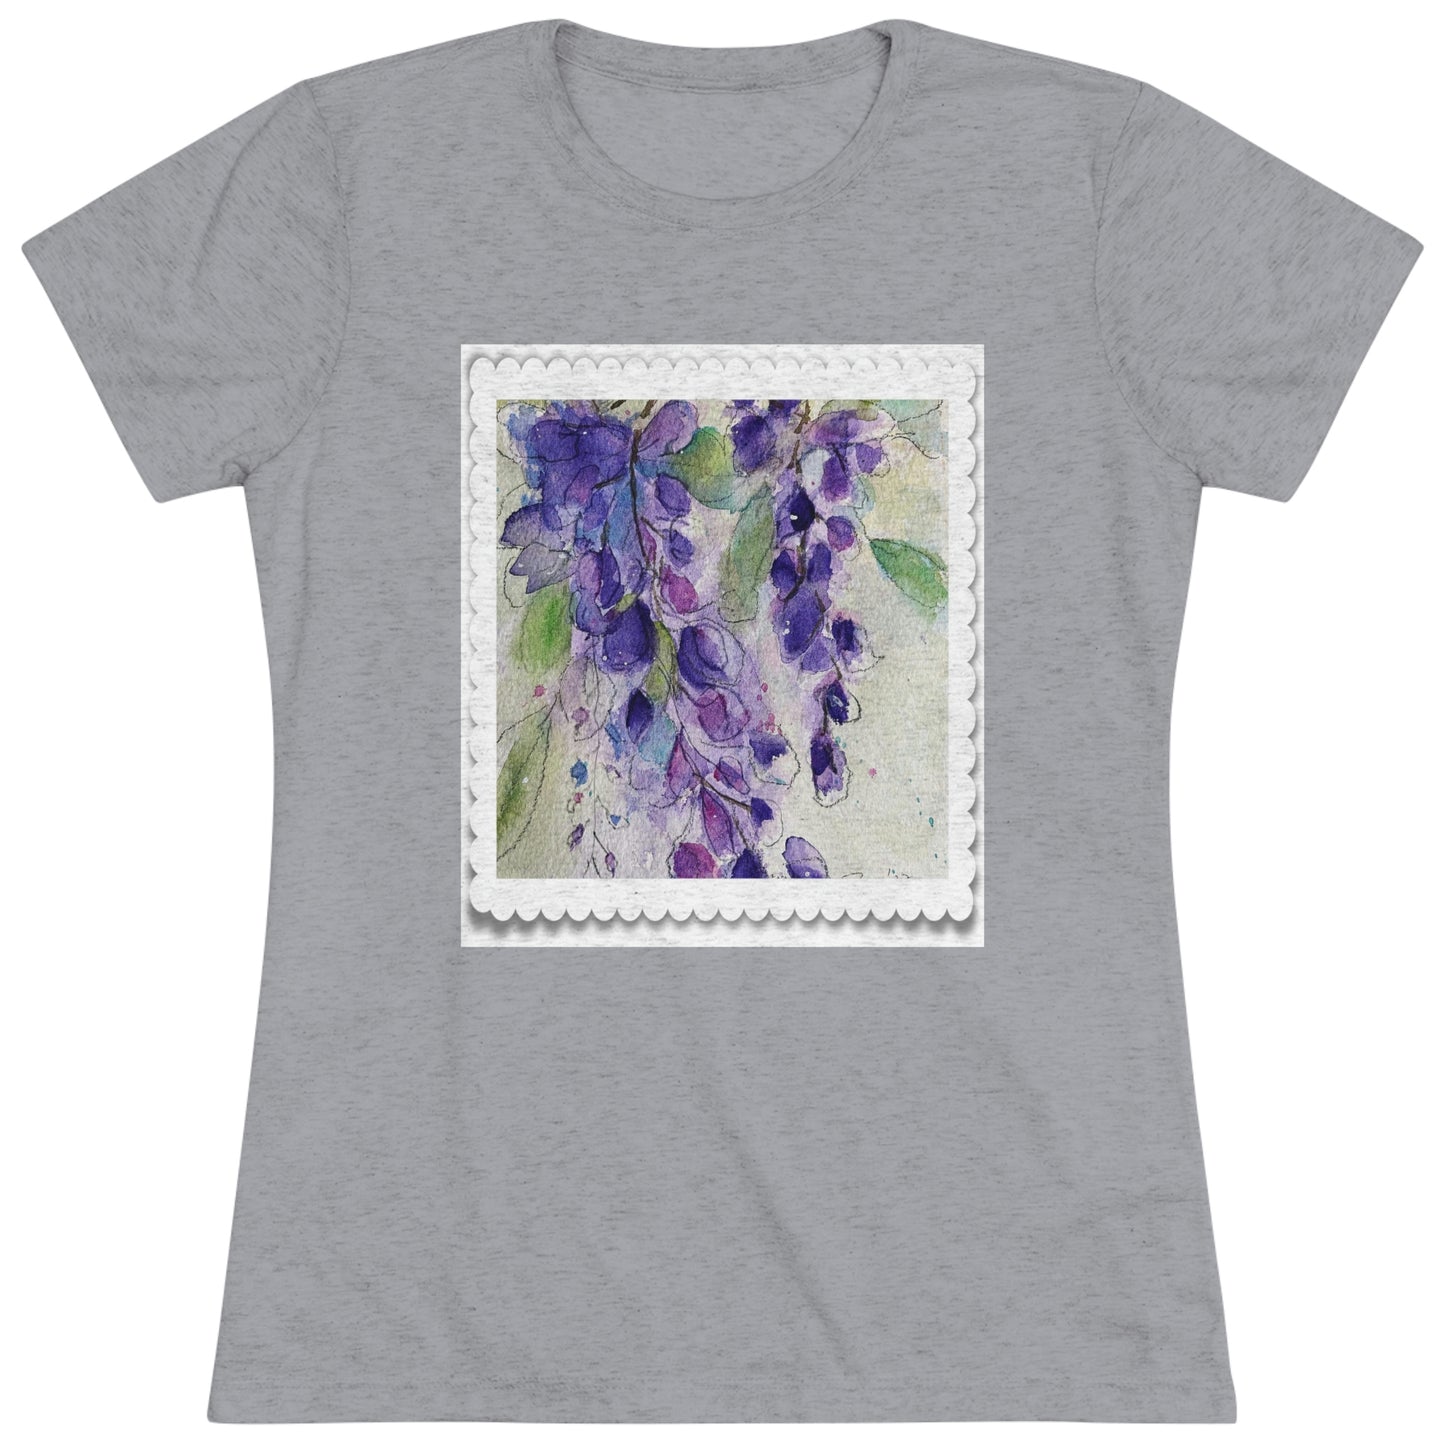 Wisteria Loose Floral Watercolor Women's fitted Triblend Tee  tee shirt